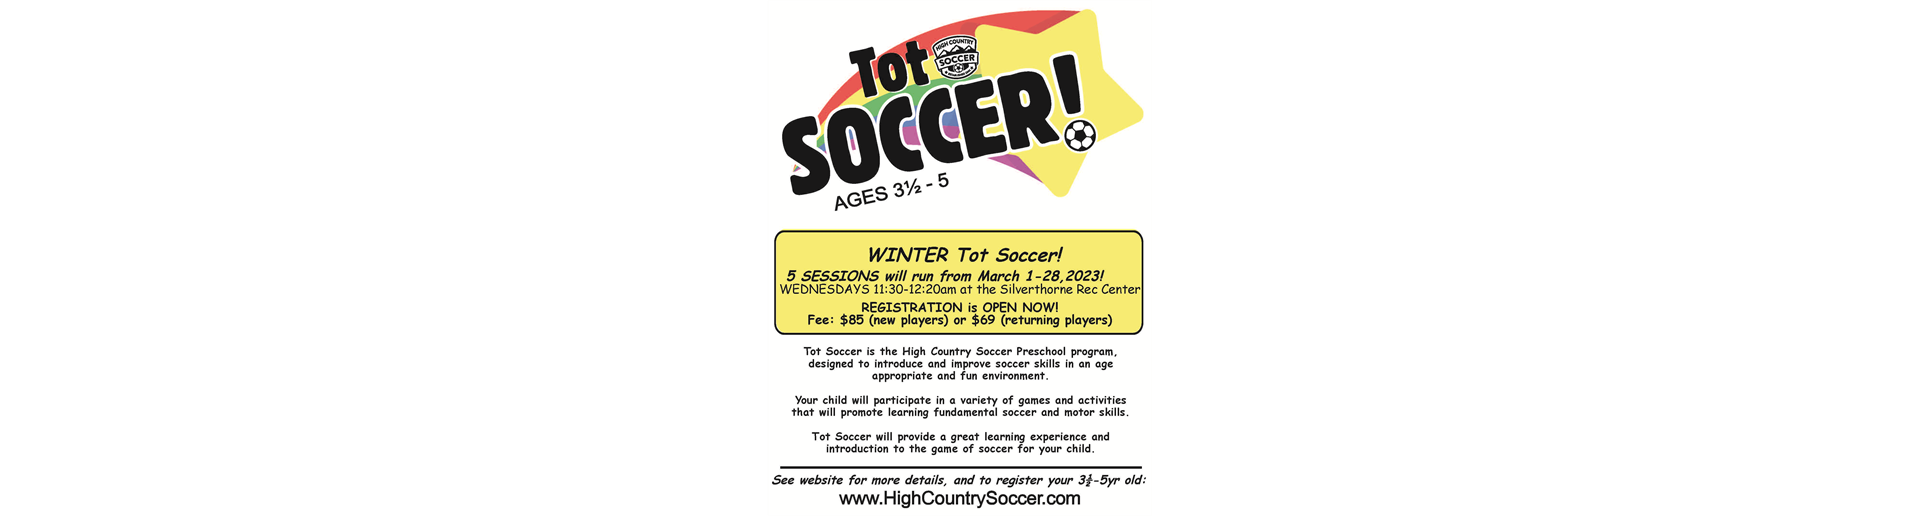 Tot Soccer starts March 1 in Silverthorne!